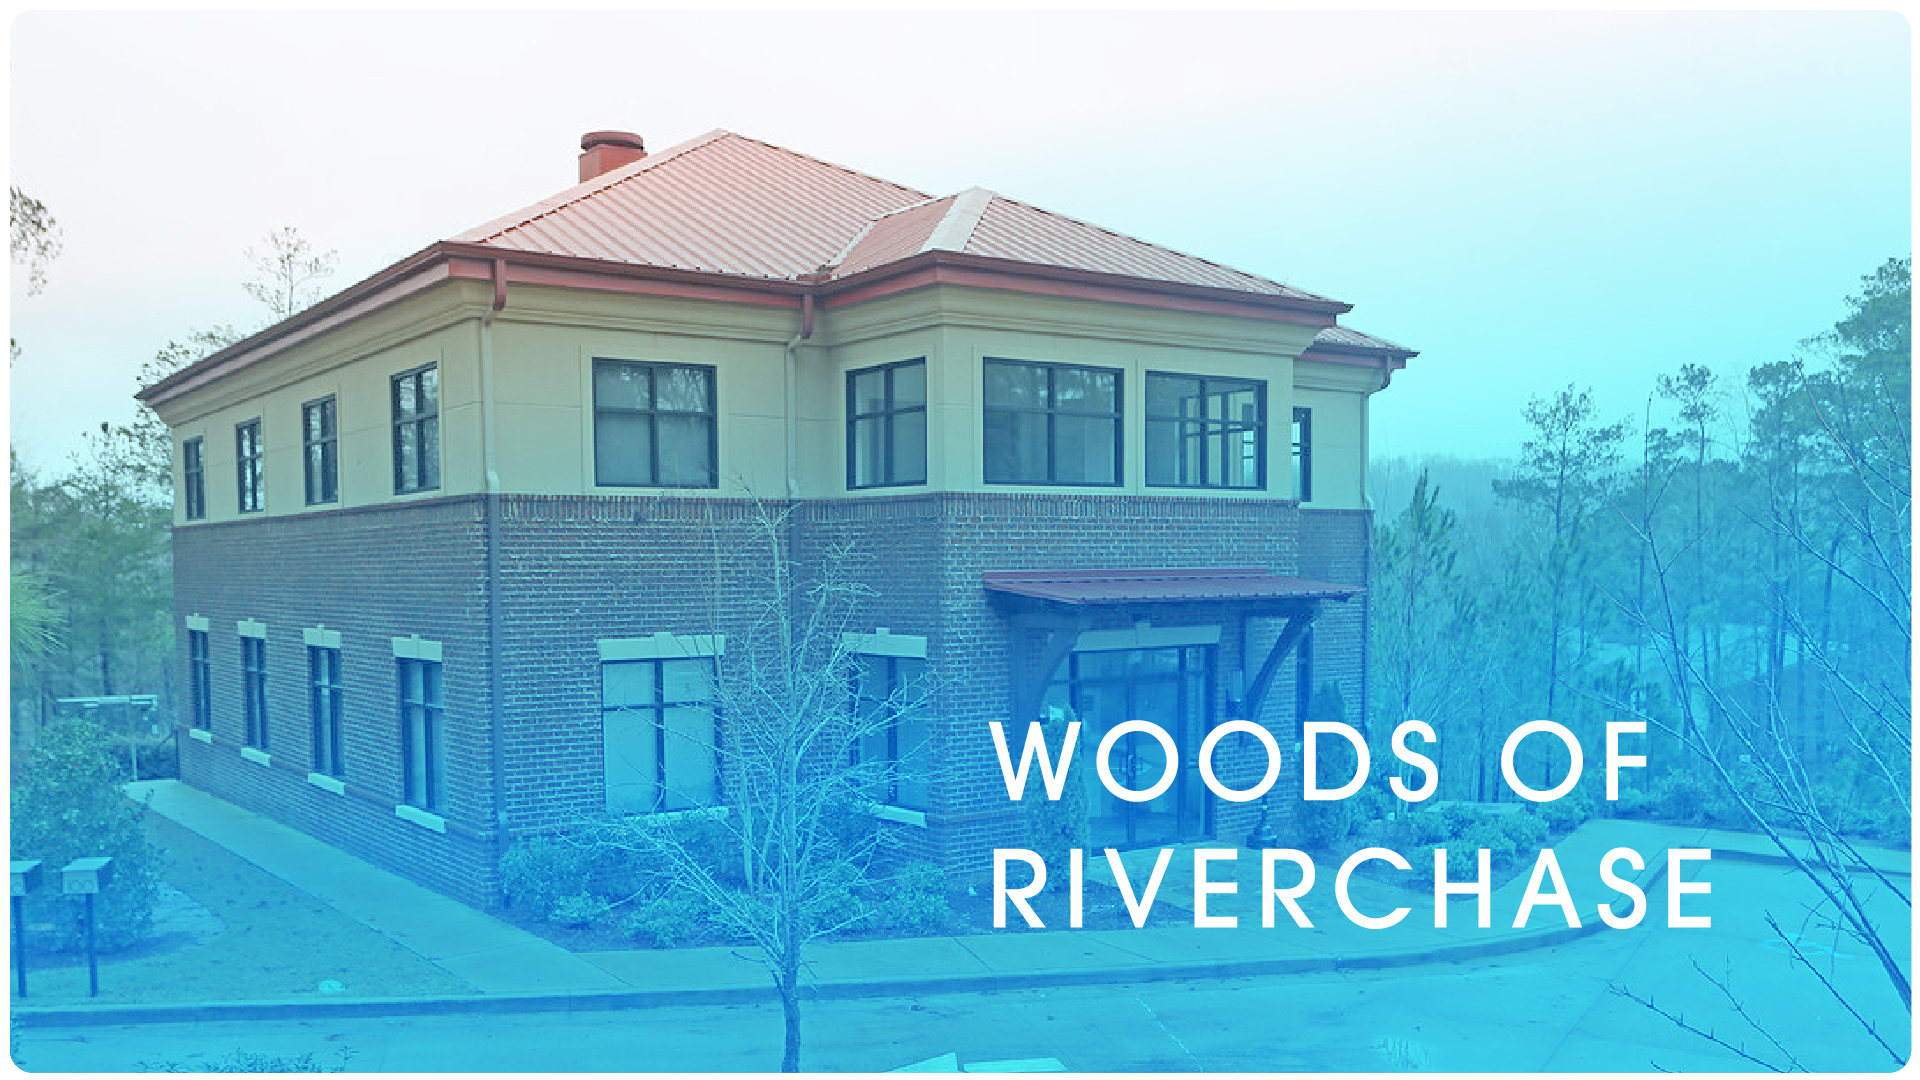 Woods of Riverchase